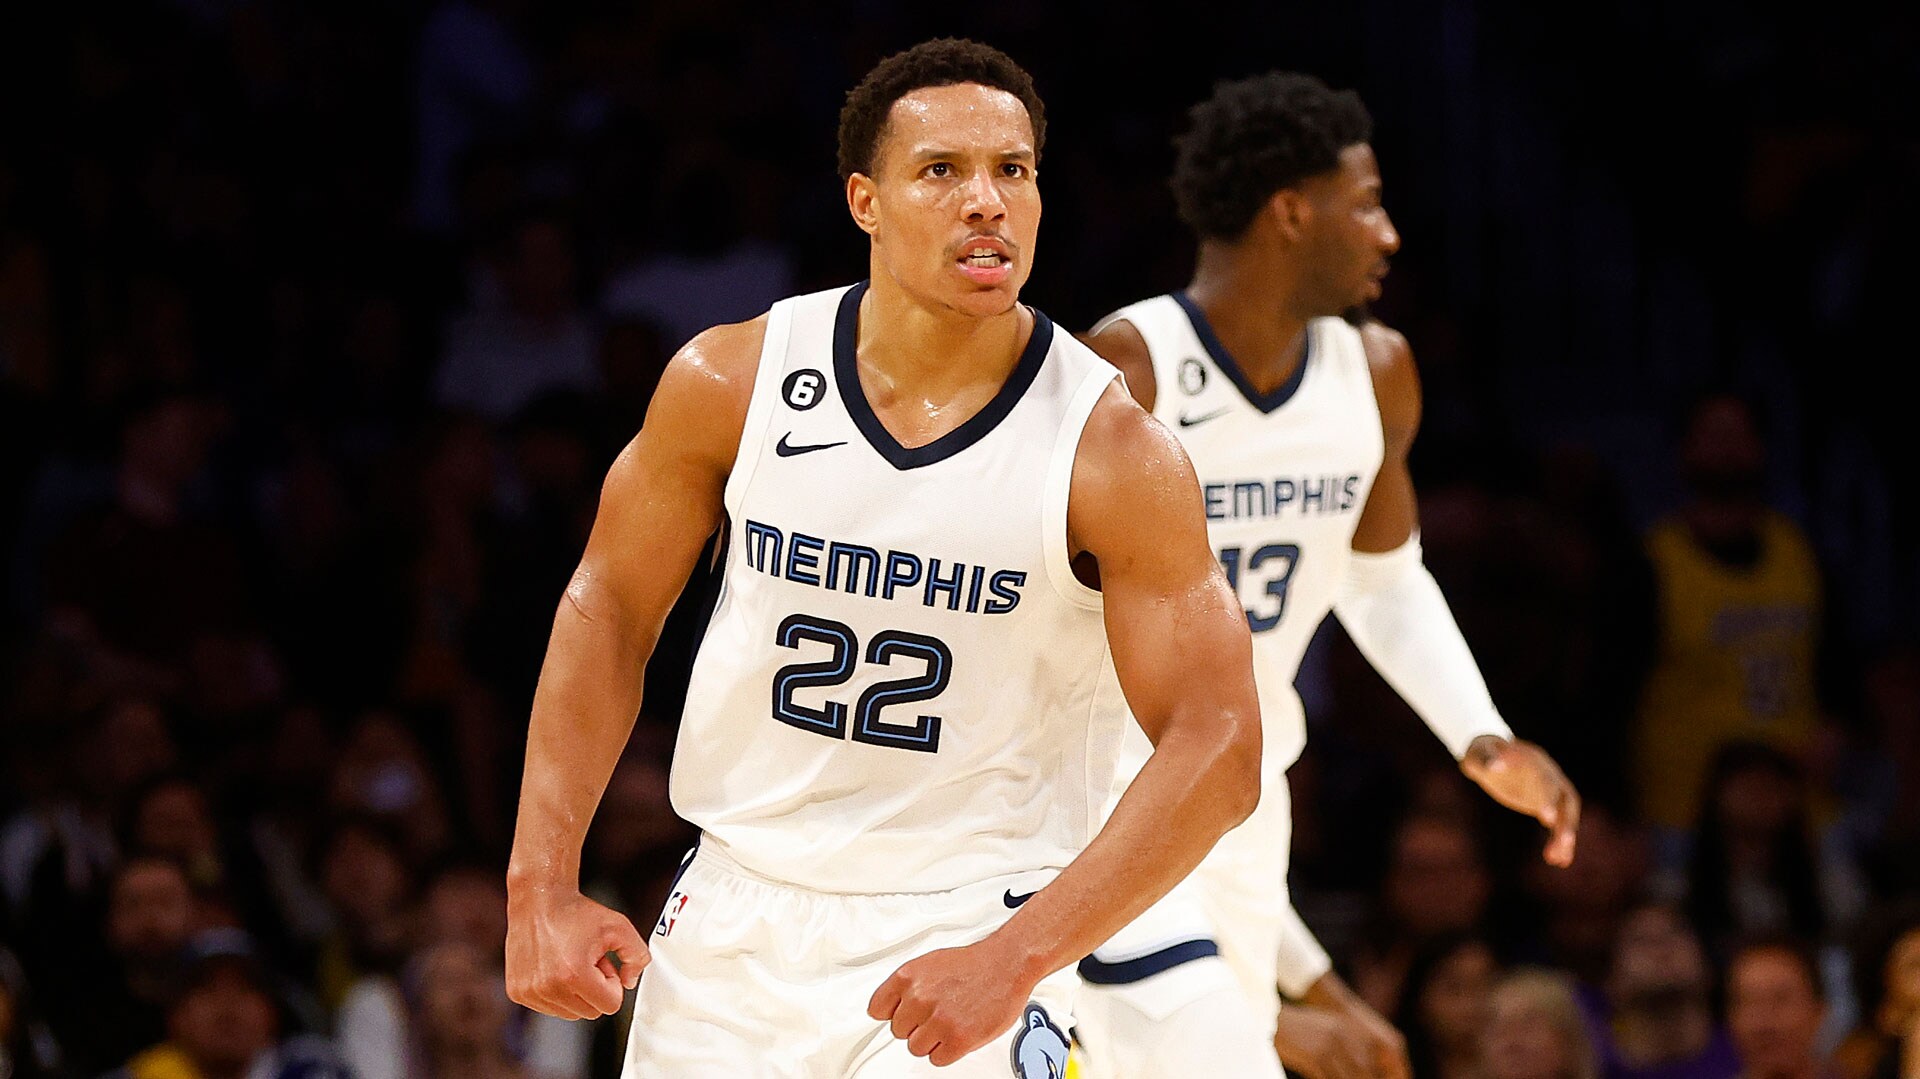 LOS ANGELES, CALIFORNIA - APRIL 24: Desmond Bane #22 of the Memphis Grizzlies reacts after a three-point shot against the Los Angeles Lakers in the first half of Game Four of the Western Conference First Round Playoffs at Crypto.com Arena on April 24, 2023 in Los Angeles, California.